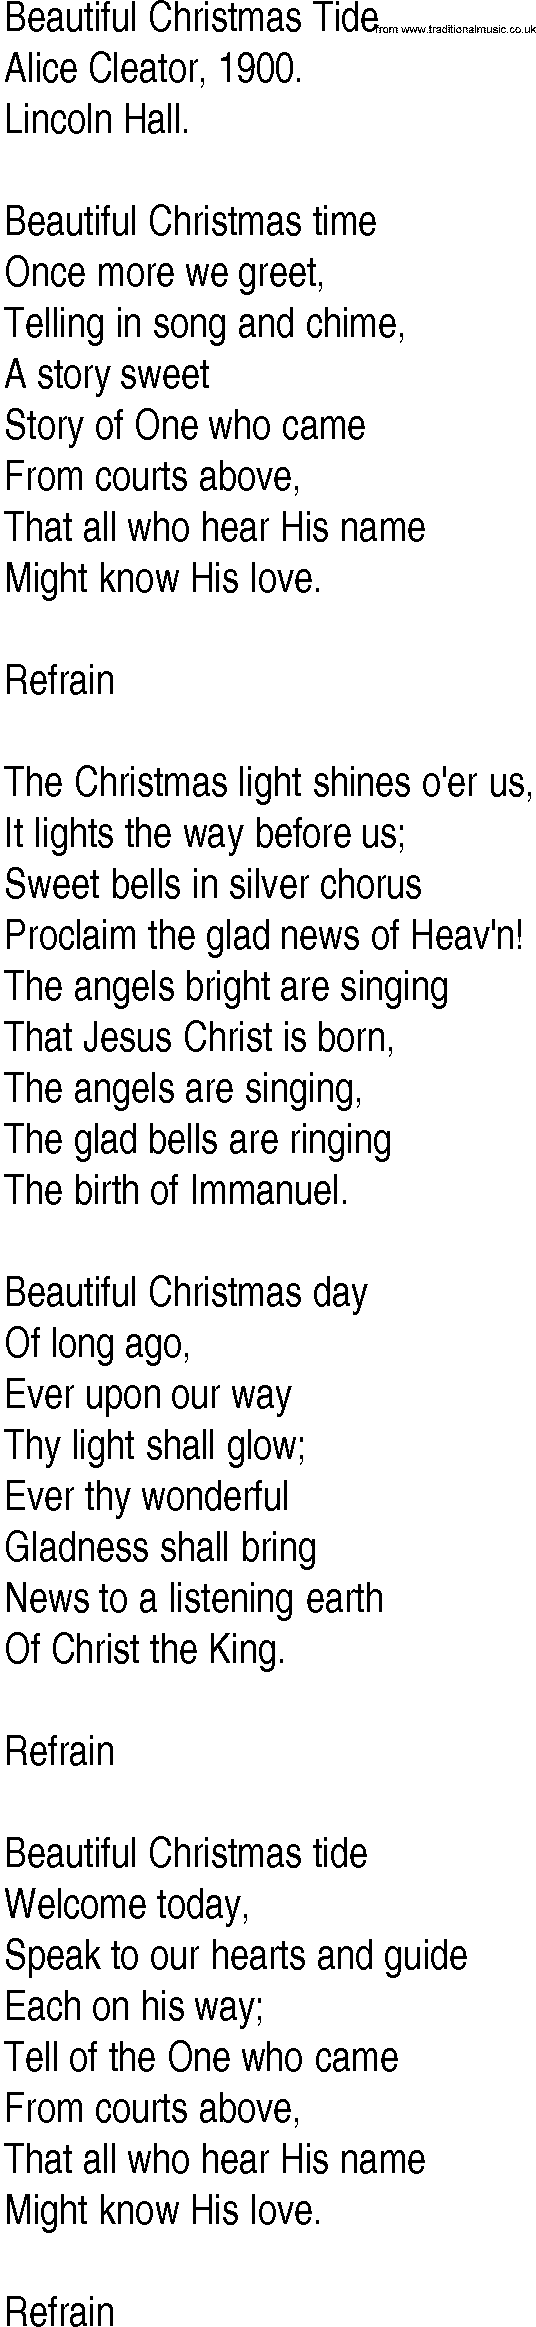 Hymn and Gospel Song: Beautiful Christmas Tide by Alice Cleator lyrics